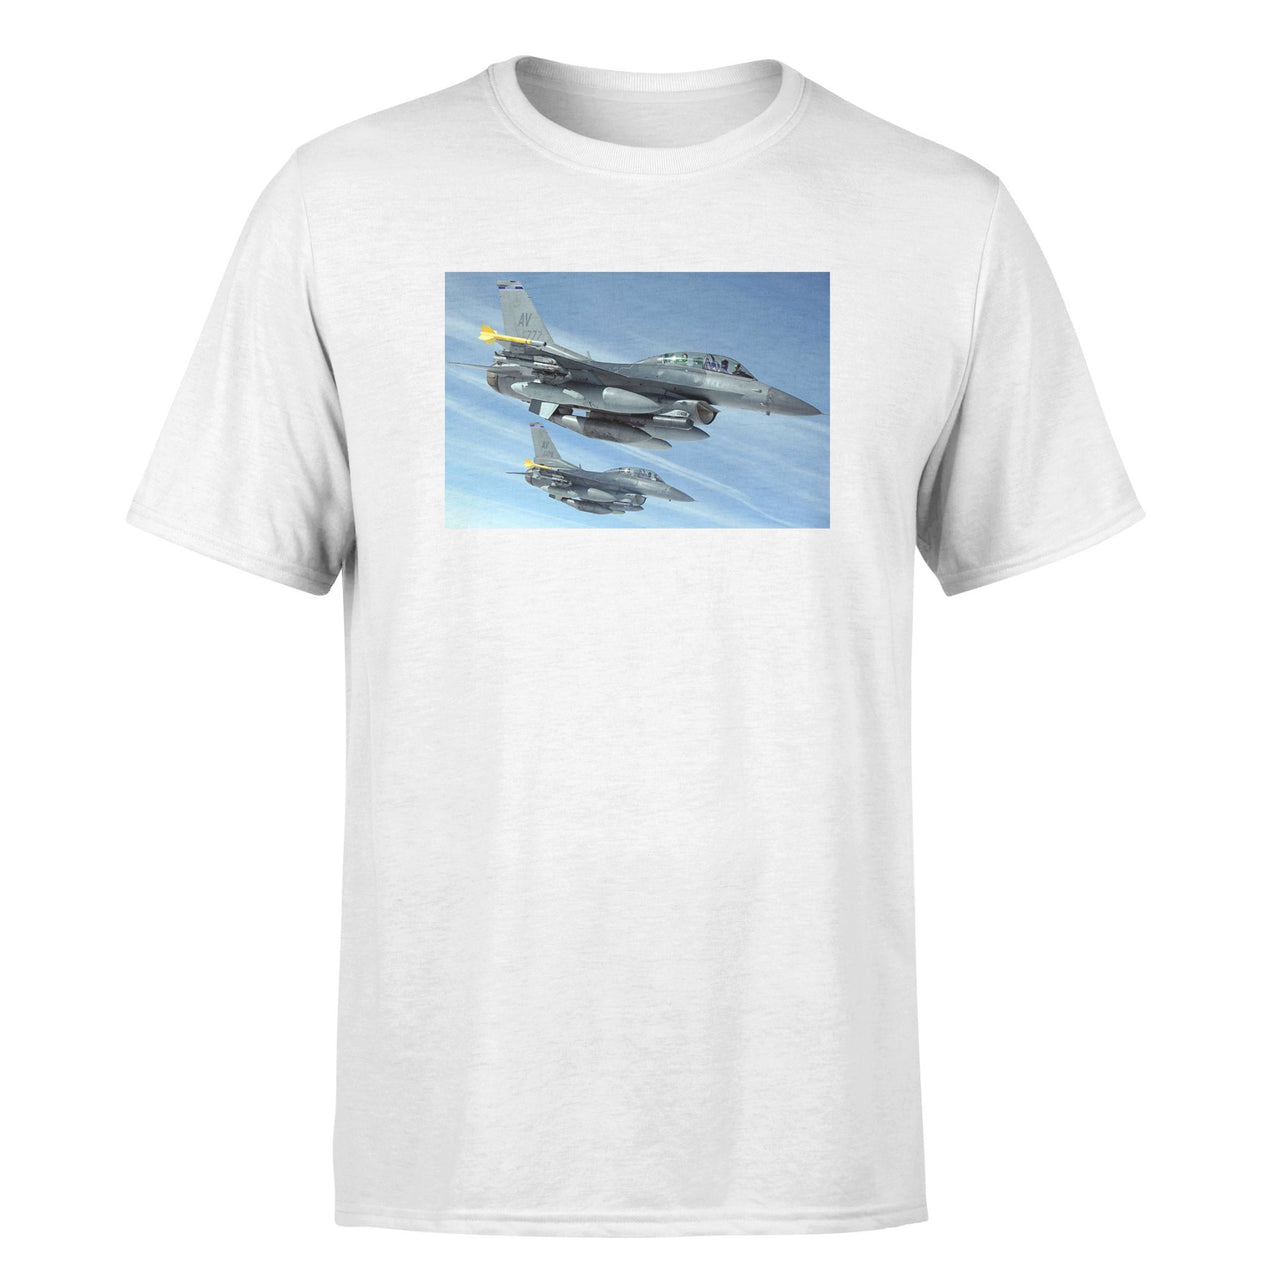 Two Fighting Falcon Designed T-Shirts